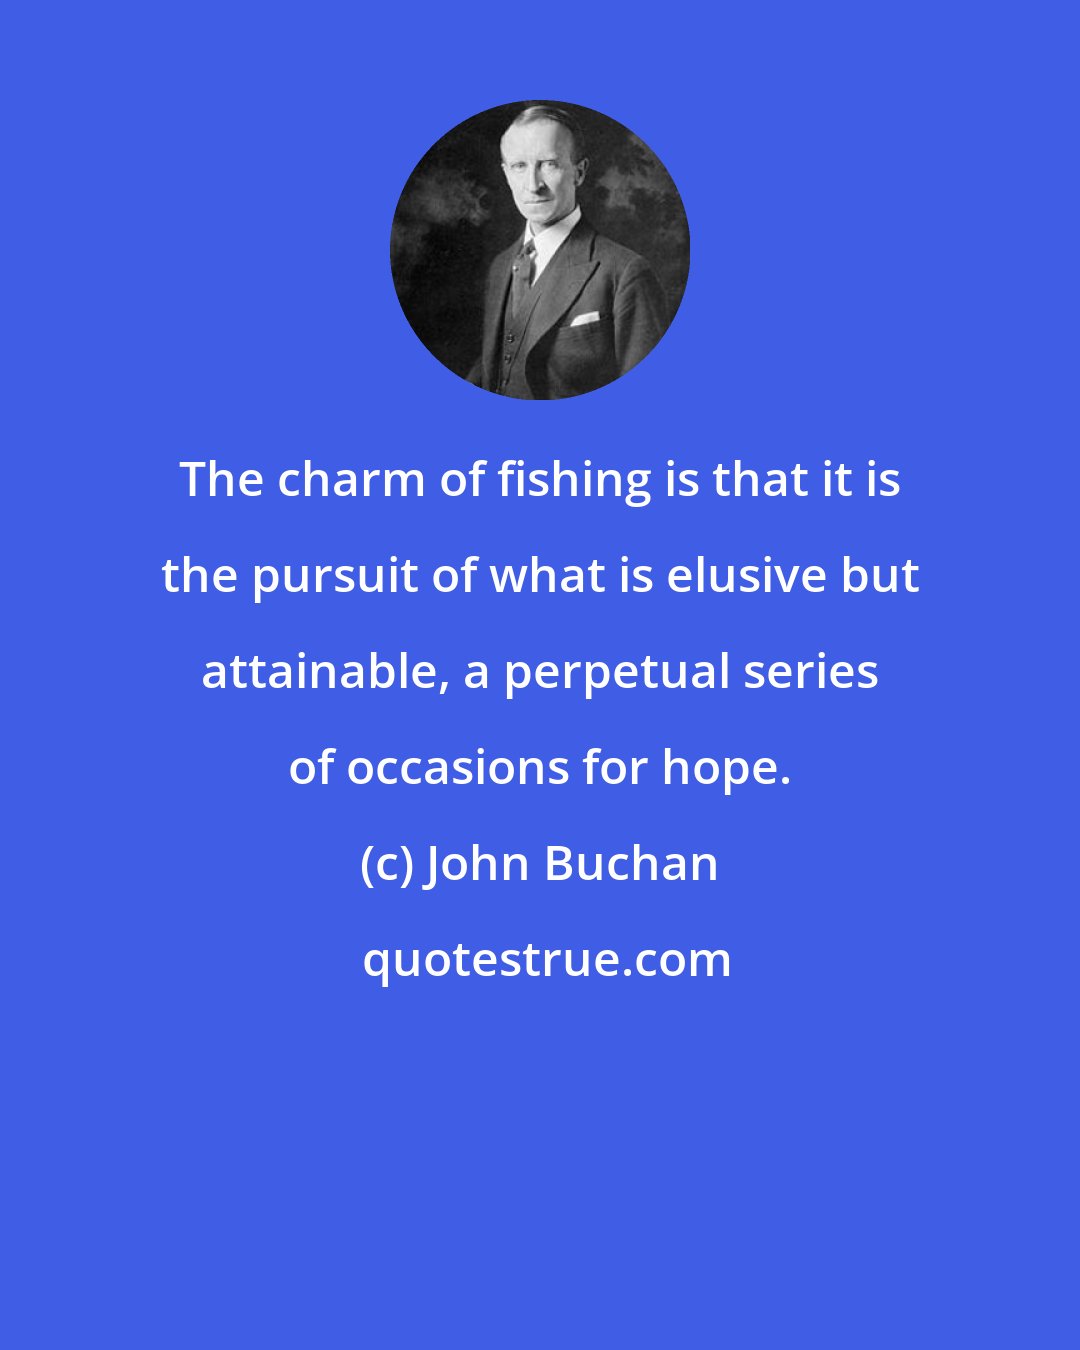 John Buchan: The charm of fishing is that it is the pursuit of what is elusive but attainable, a perpetual series of occasions for hope.